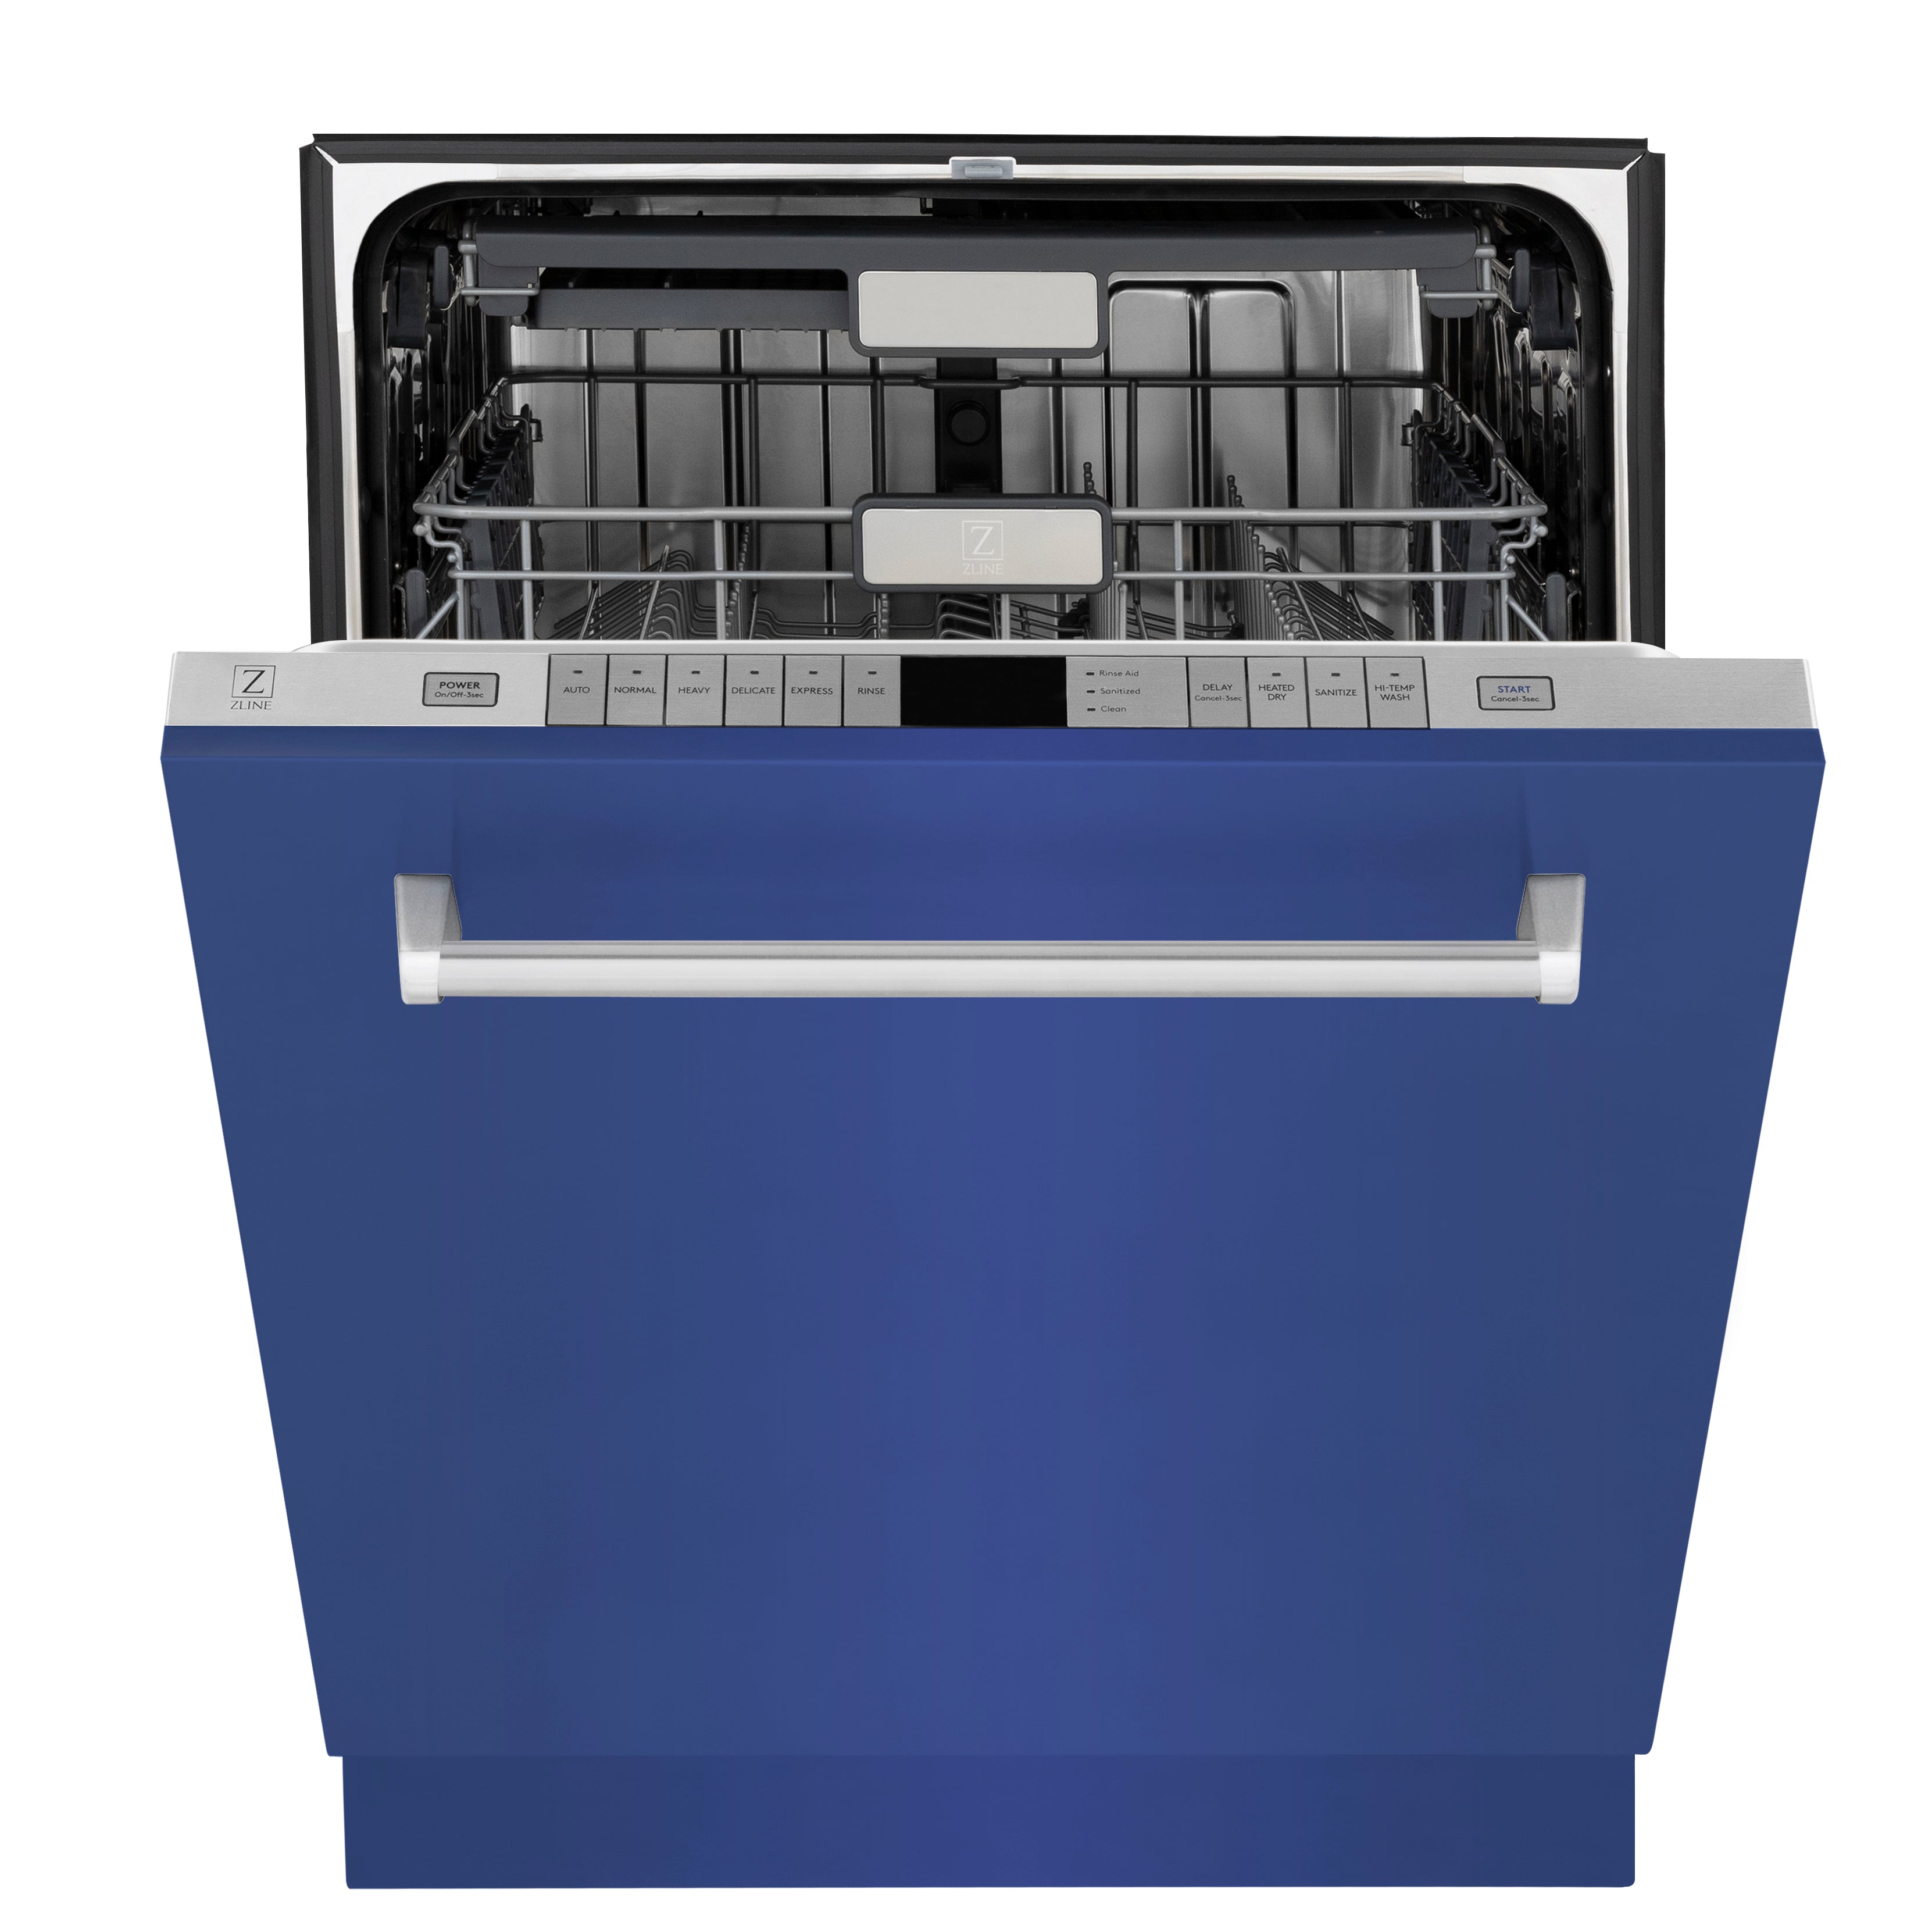 ZLINE 24" Monument Series 3rd Rack Top Touch Control Dishwasher in Blue Matte with Stainless Steel Tub, 45dBa